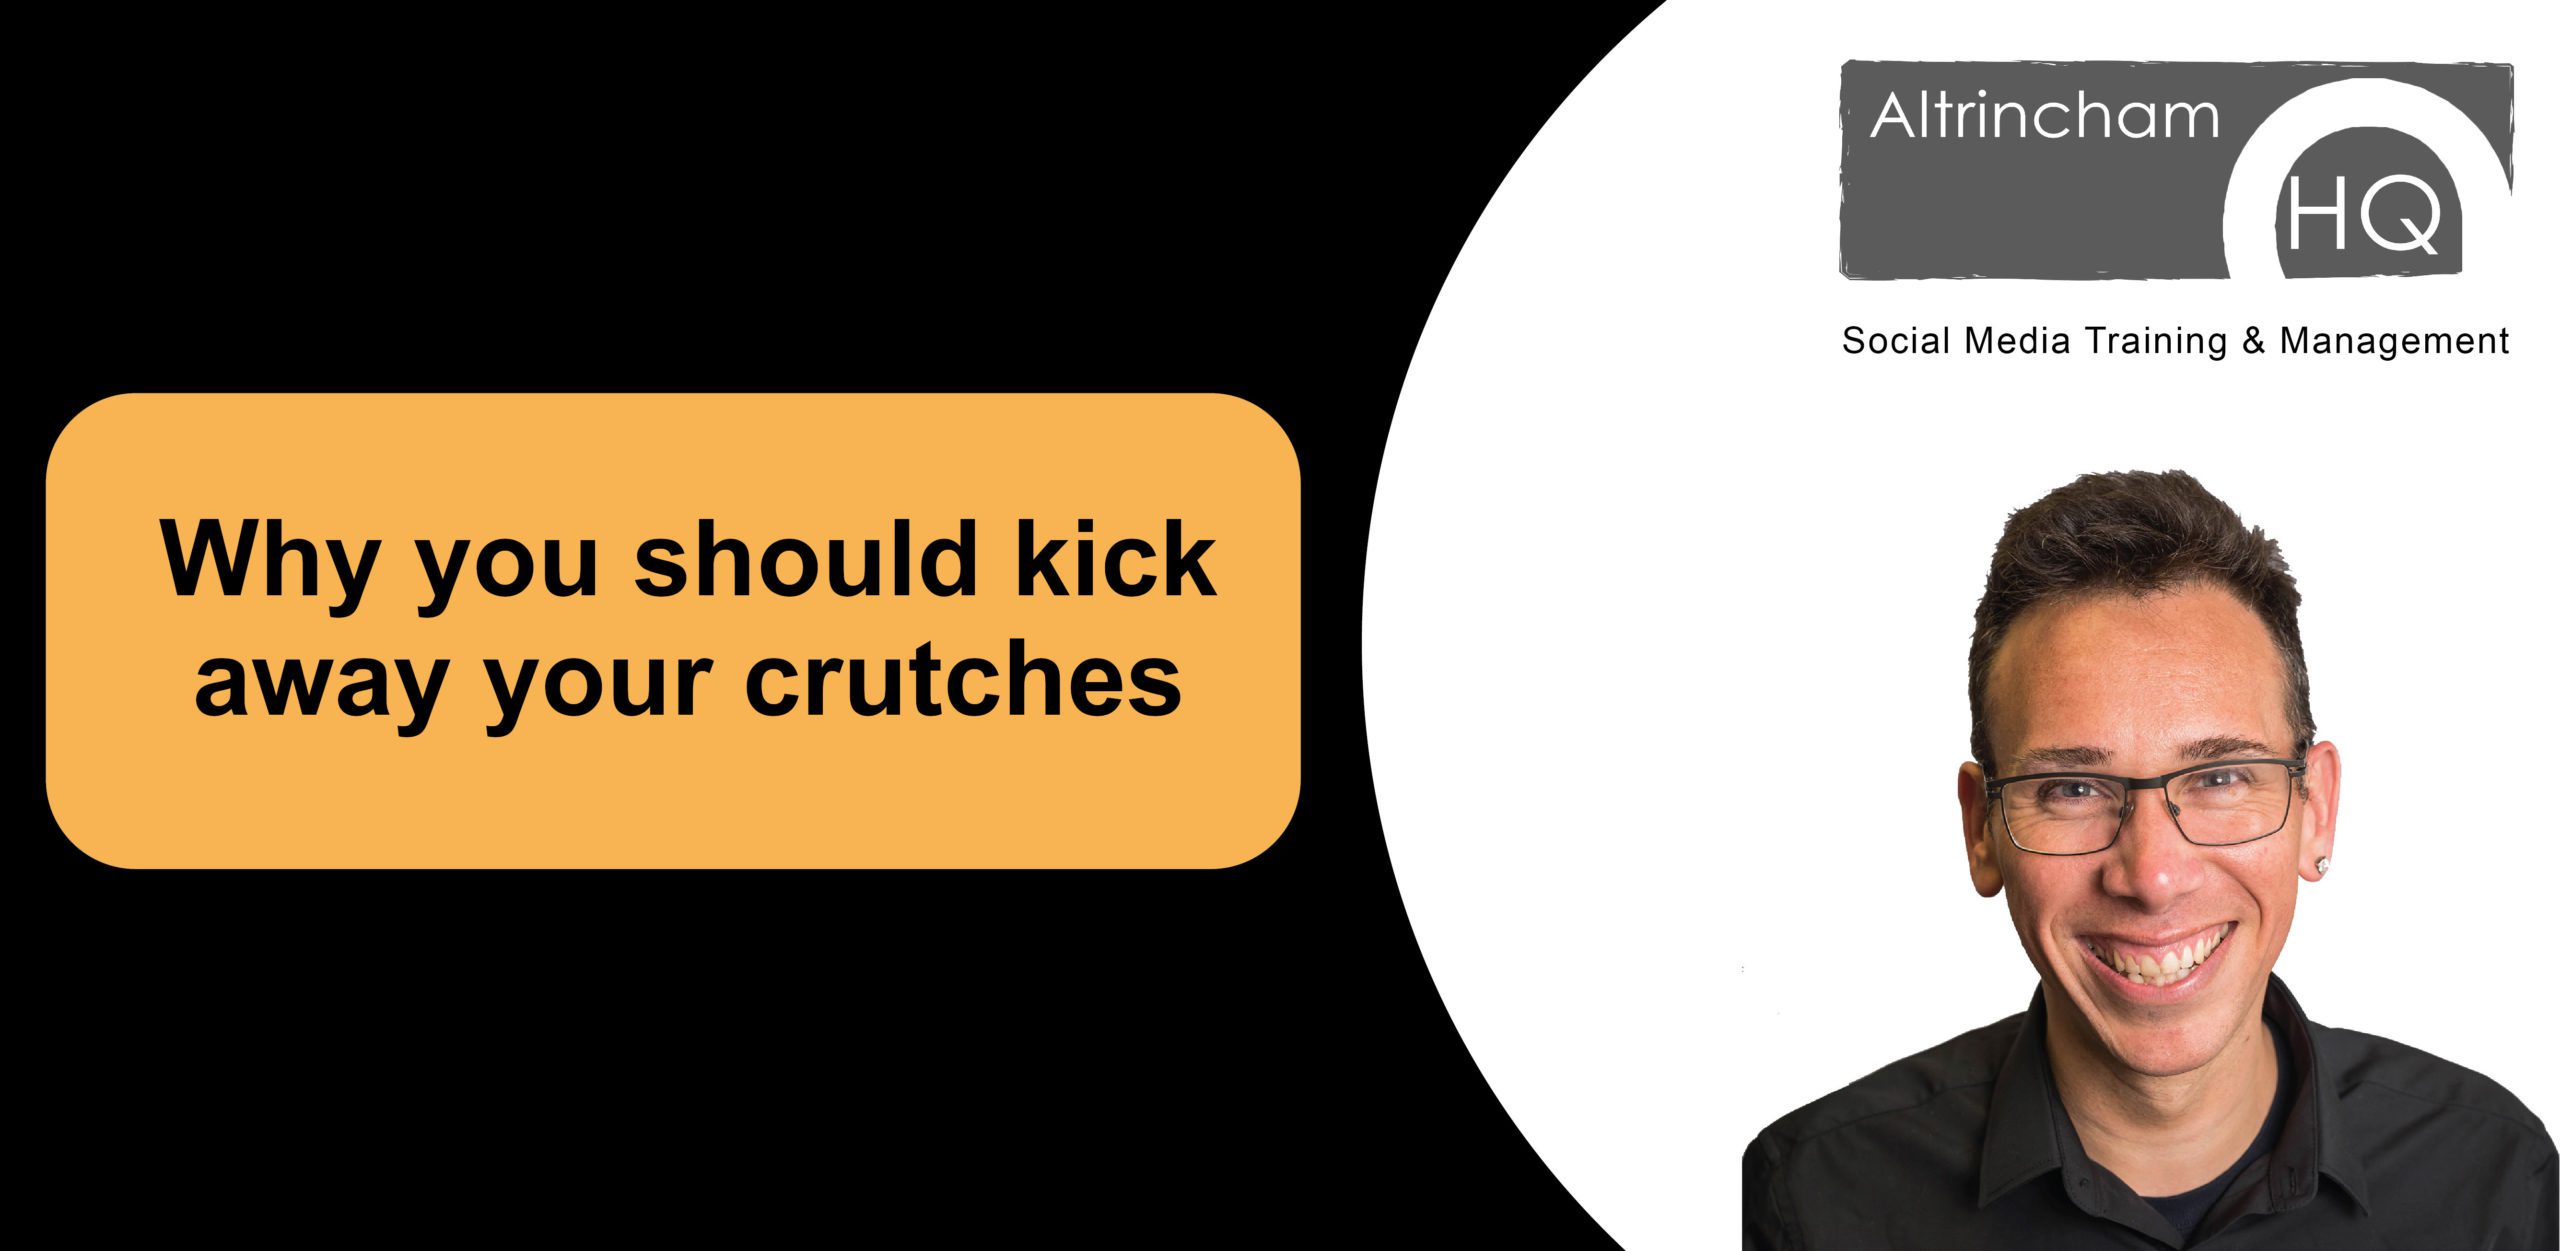 BUSINESS INSIGHT: Why you should kick away your crutches